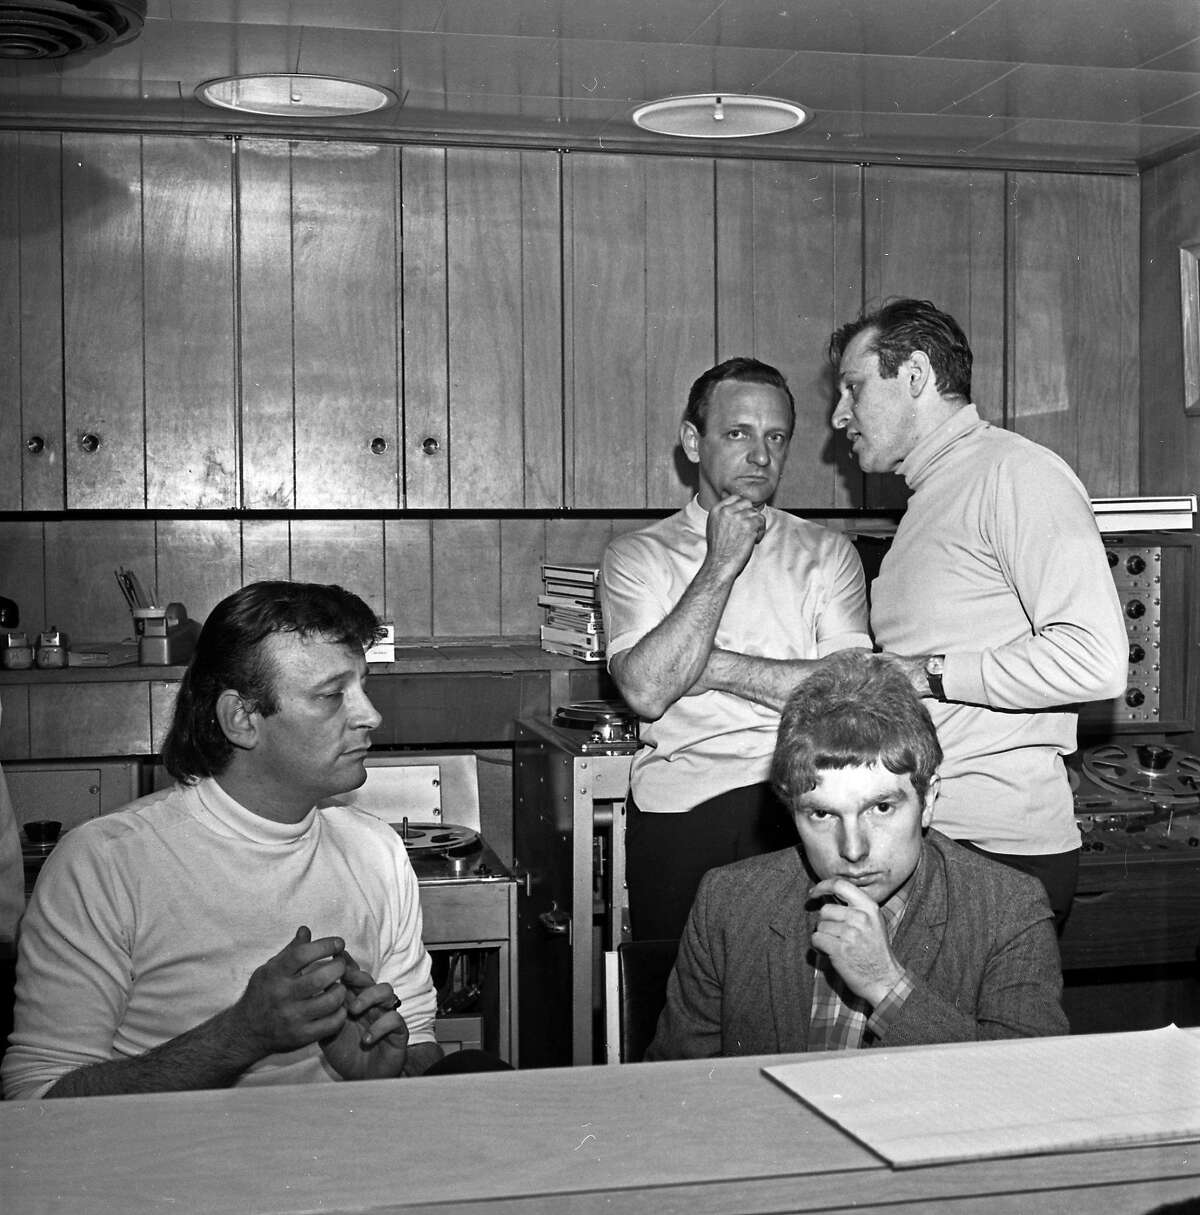 Forefront, L-R: Songwriter/producer Bert Berns, the subject of "Bang! The Bert Berns Story," and singer/songwriter Van Morrison. Getty Images, courtesy of Bang! The Bert Story.